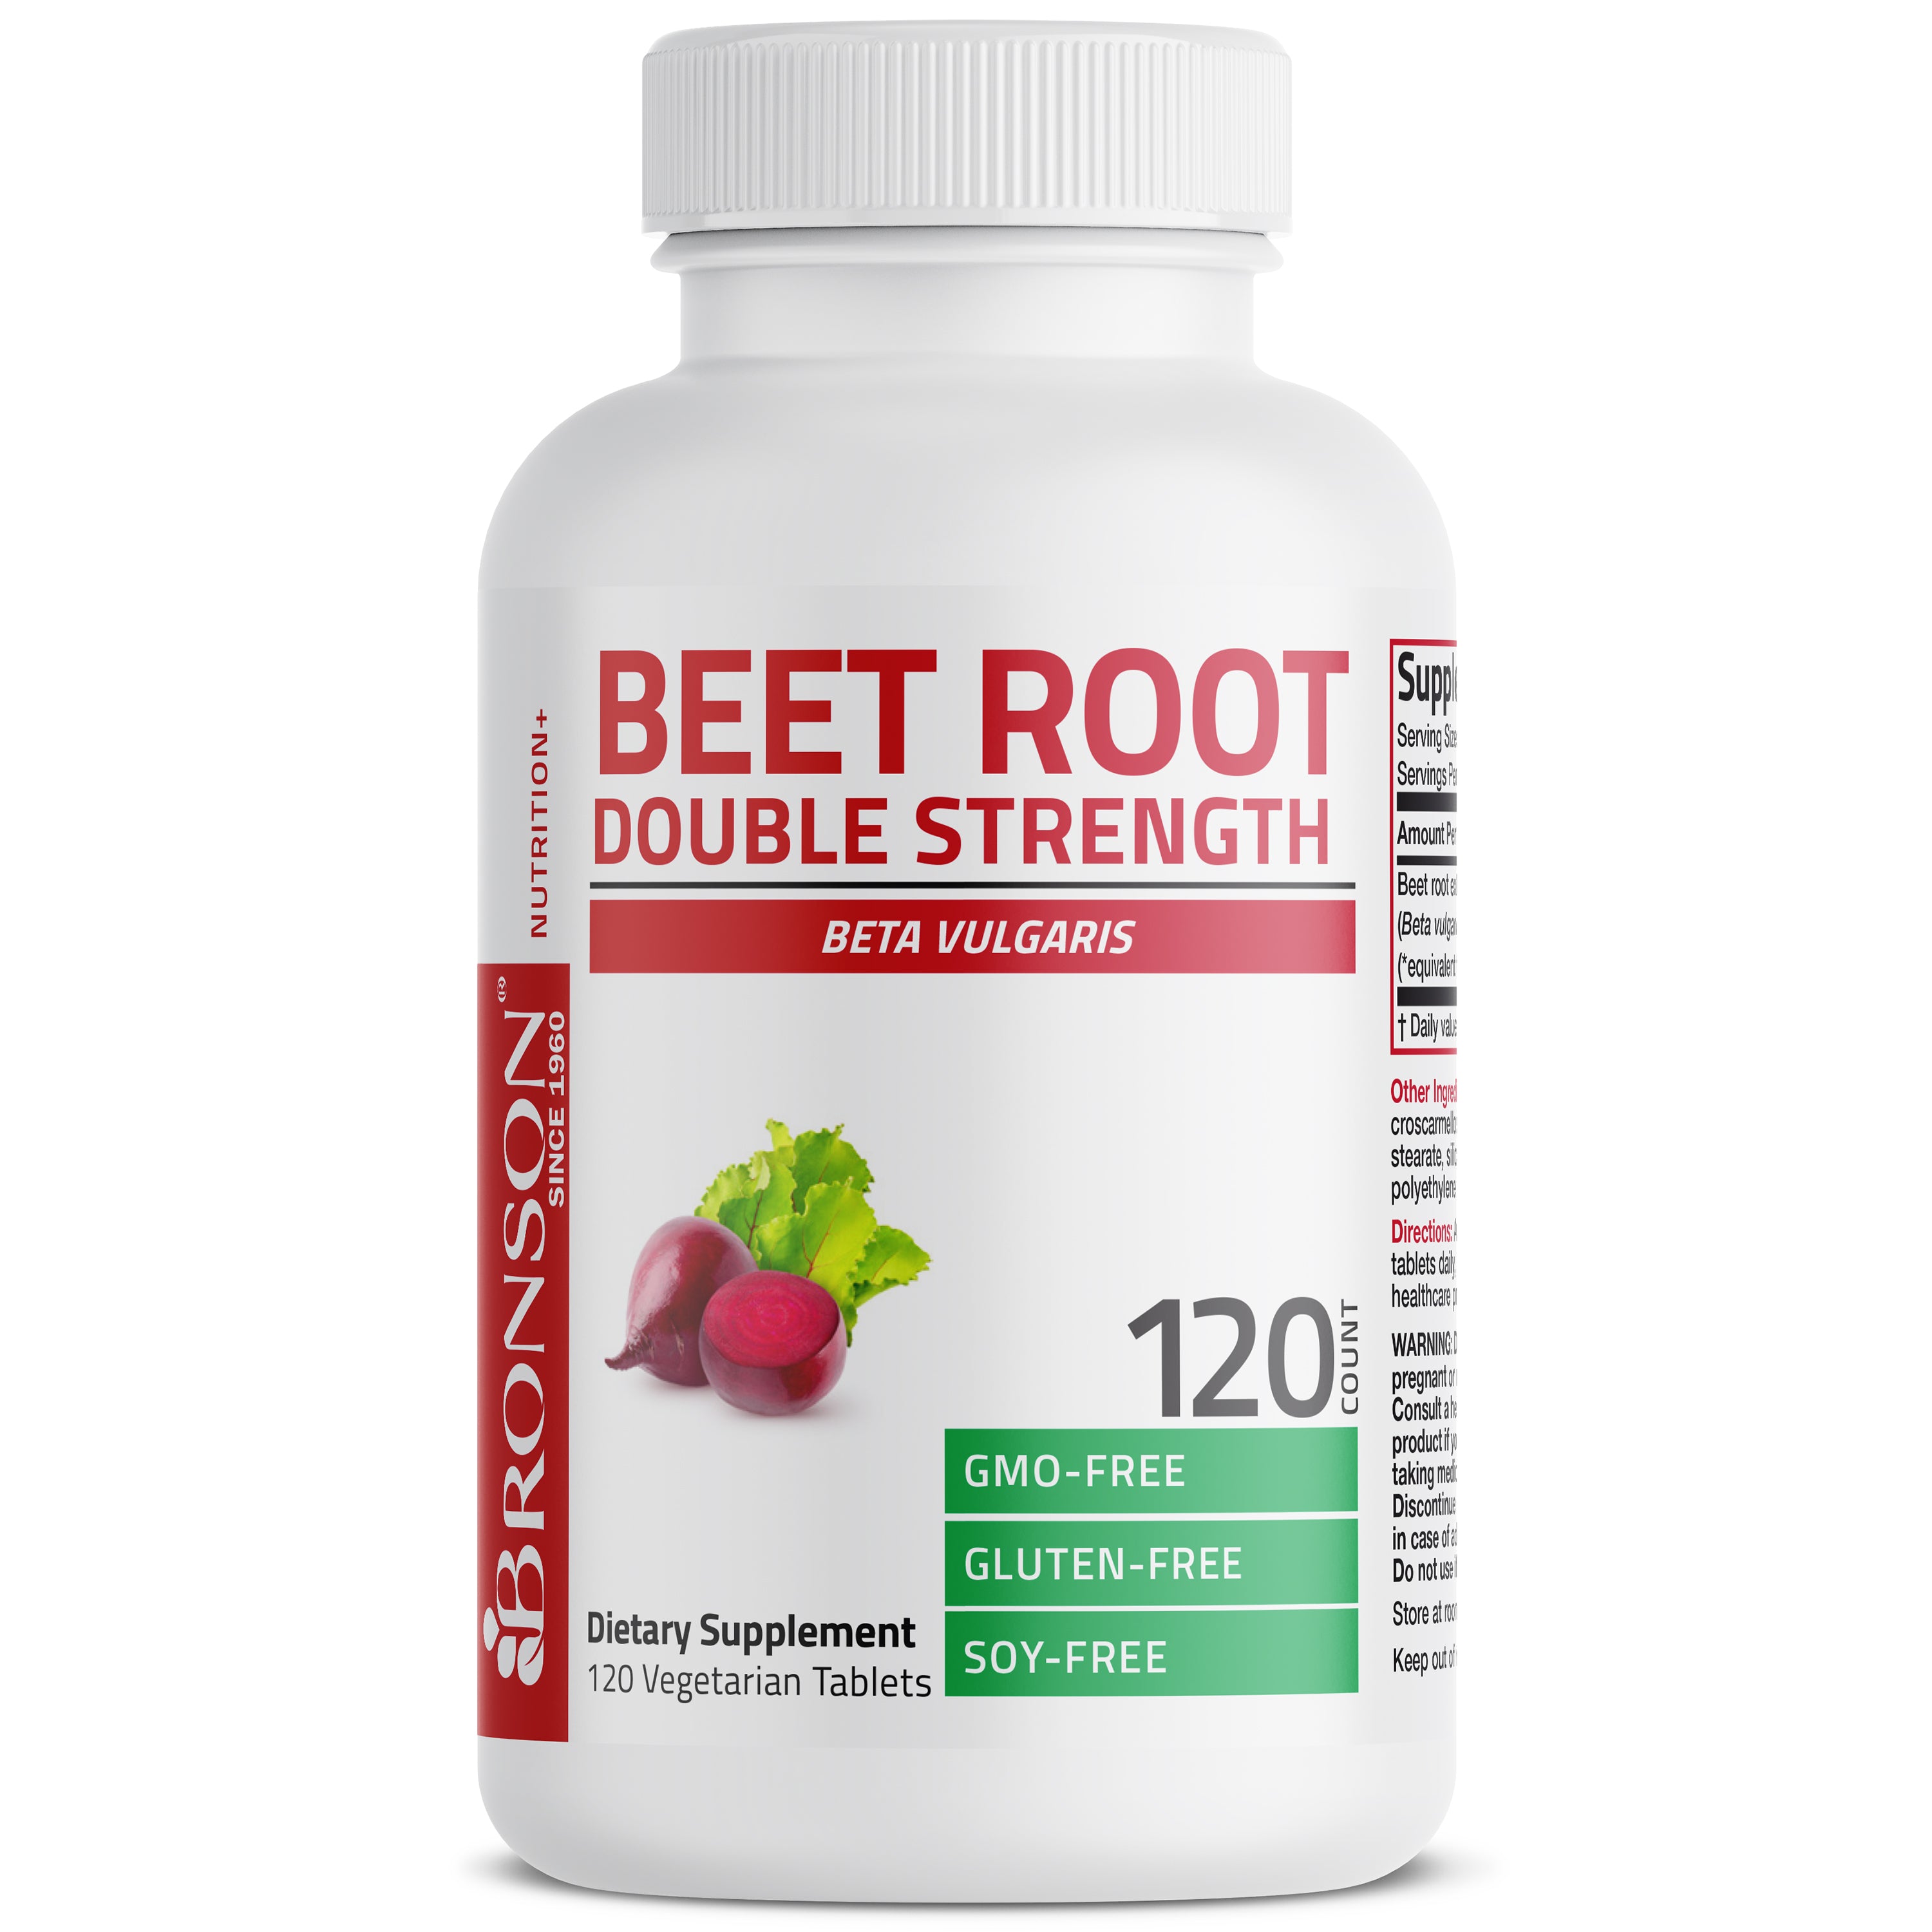 Beet Root Double Strength view 1 of 4